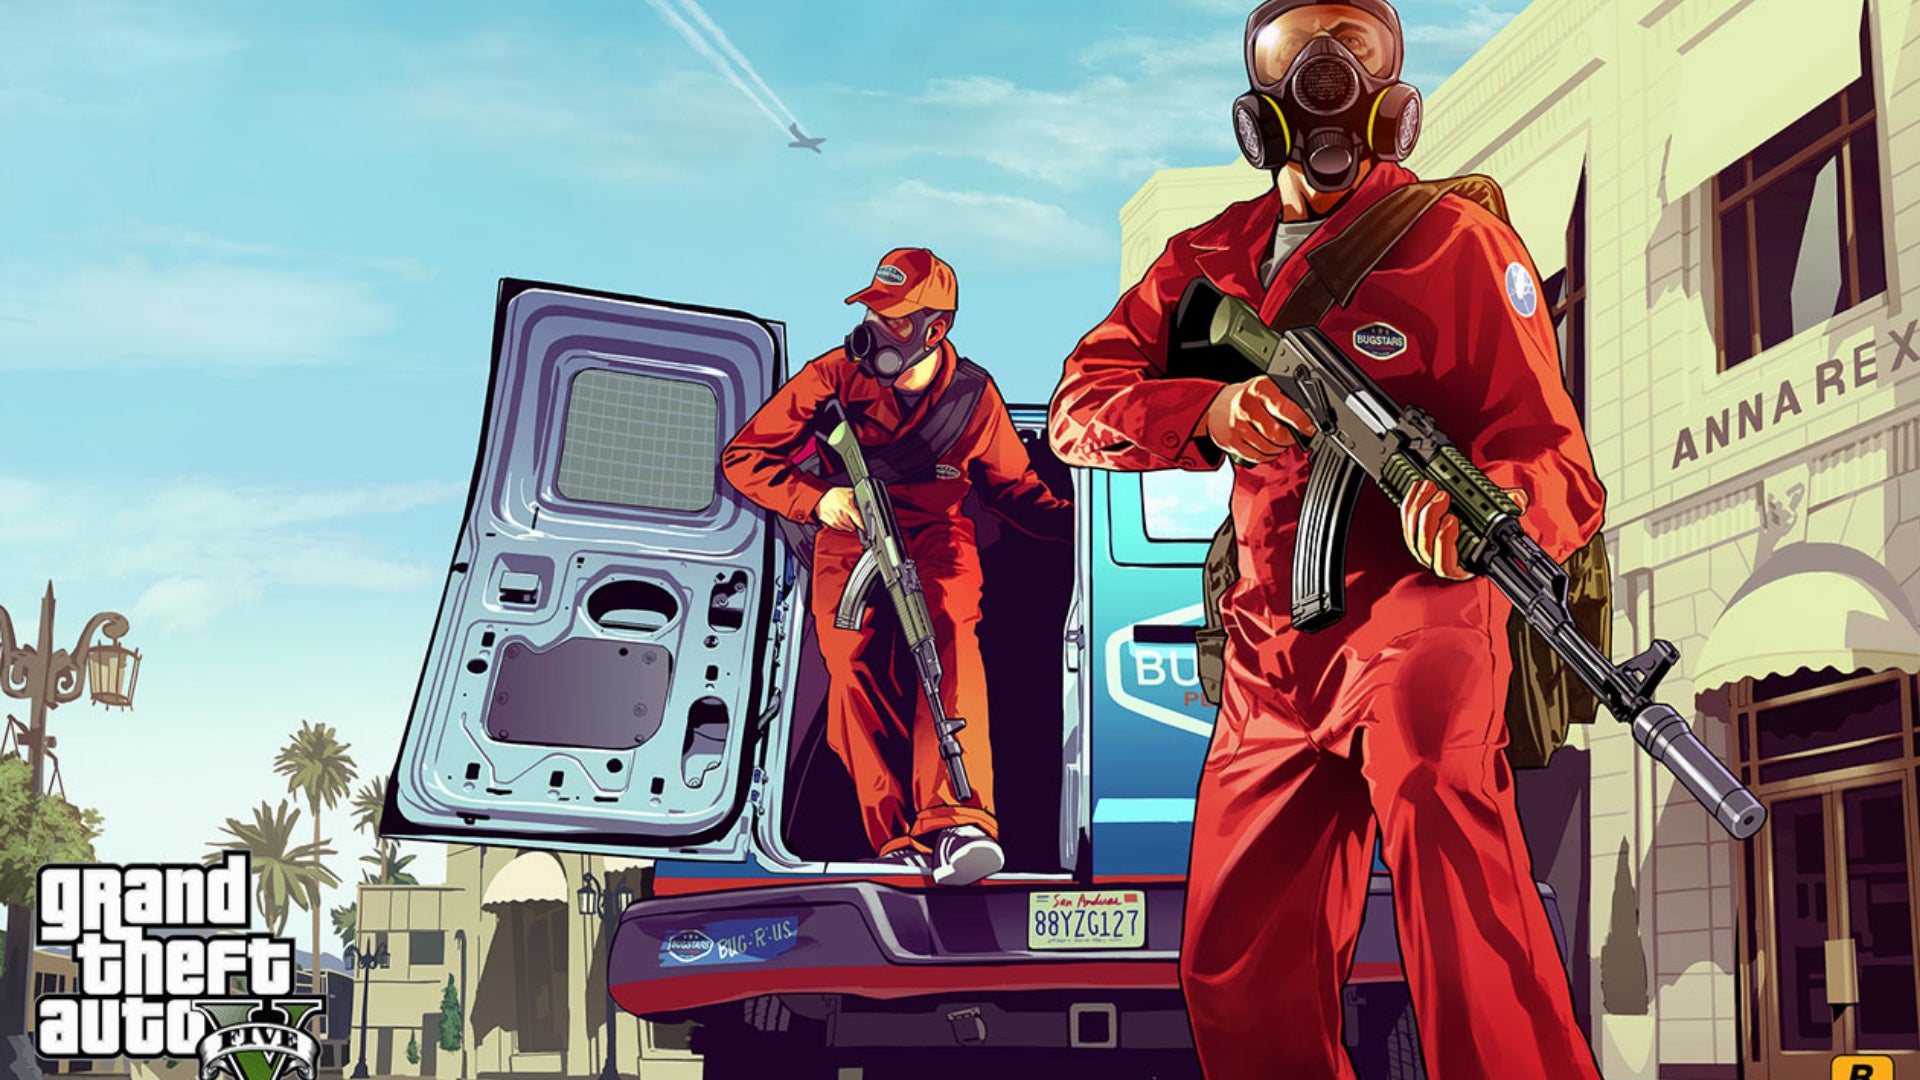 Image for GTA 6 will star a female protagonist who is part of a bank-robbing duo